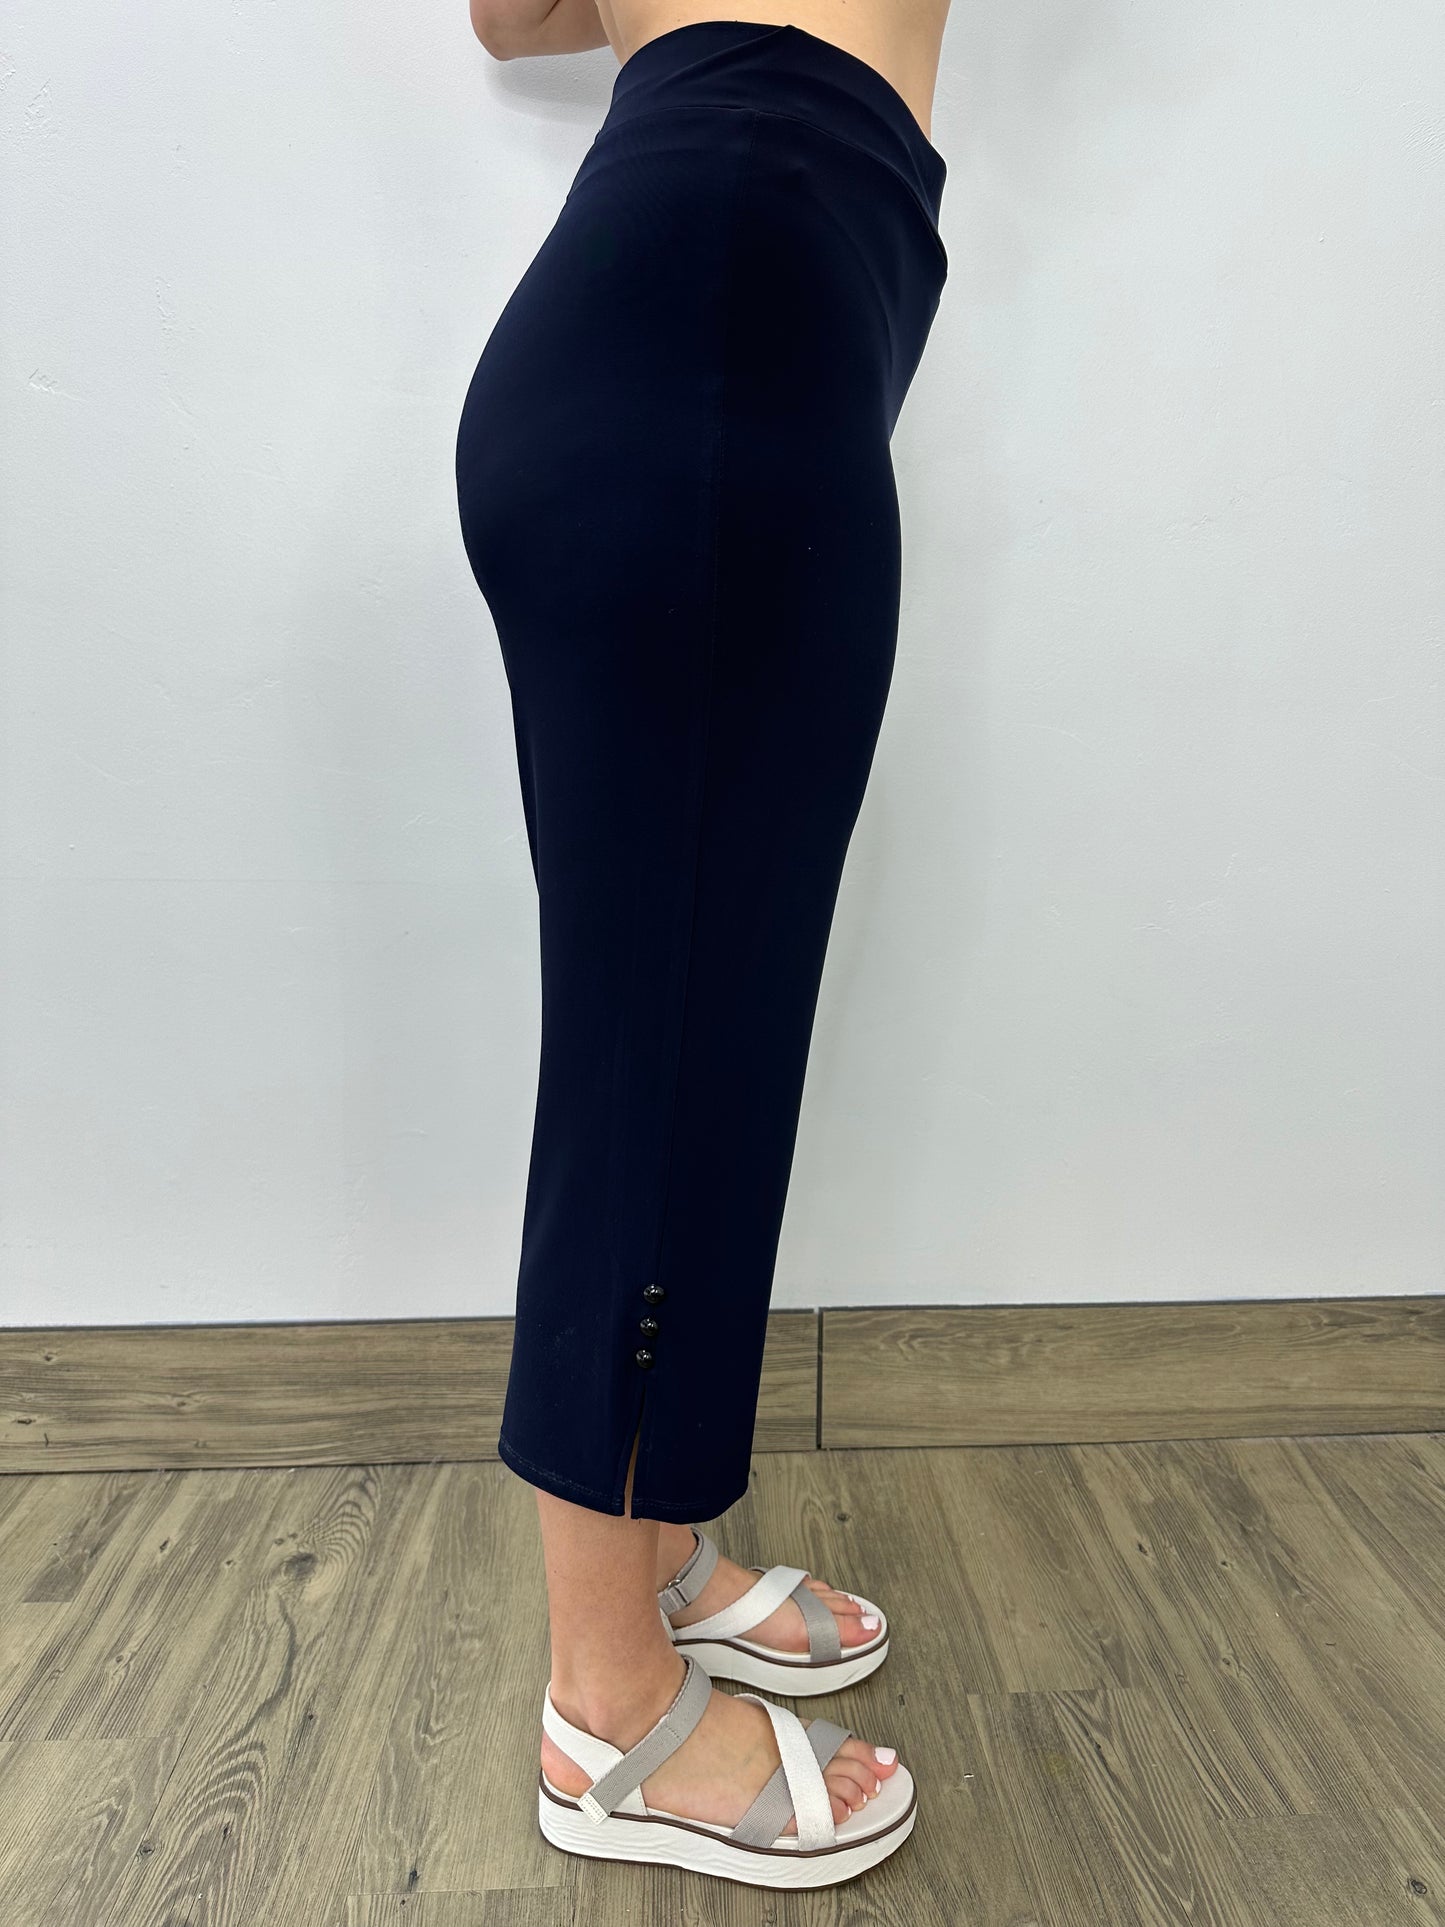 Navy Cropped Pant 21" Inseam